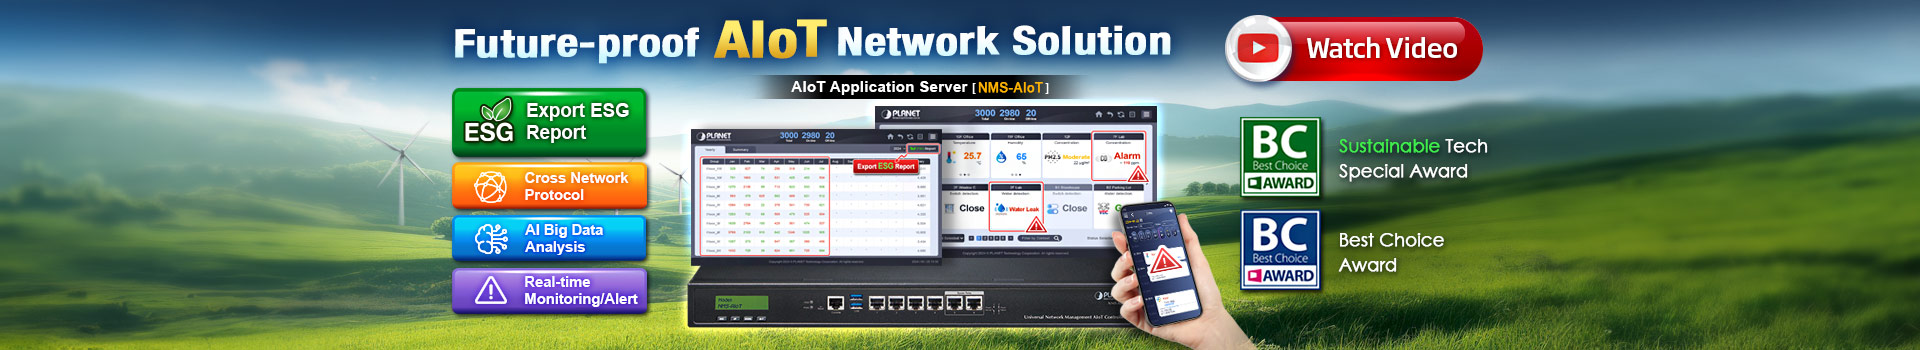 Future-proof AIoT Network Solution